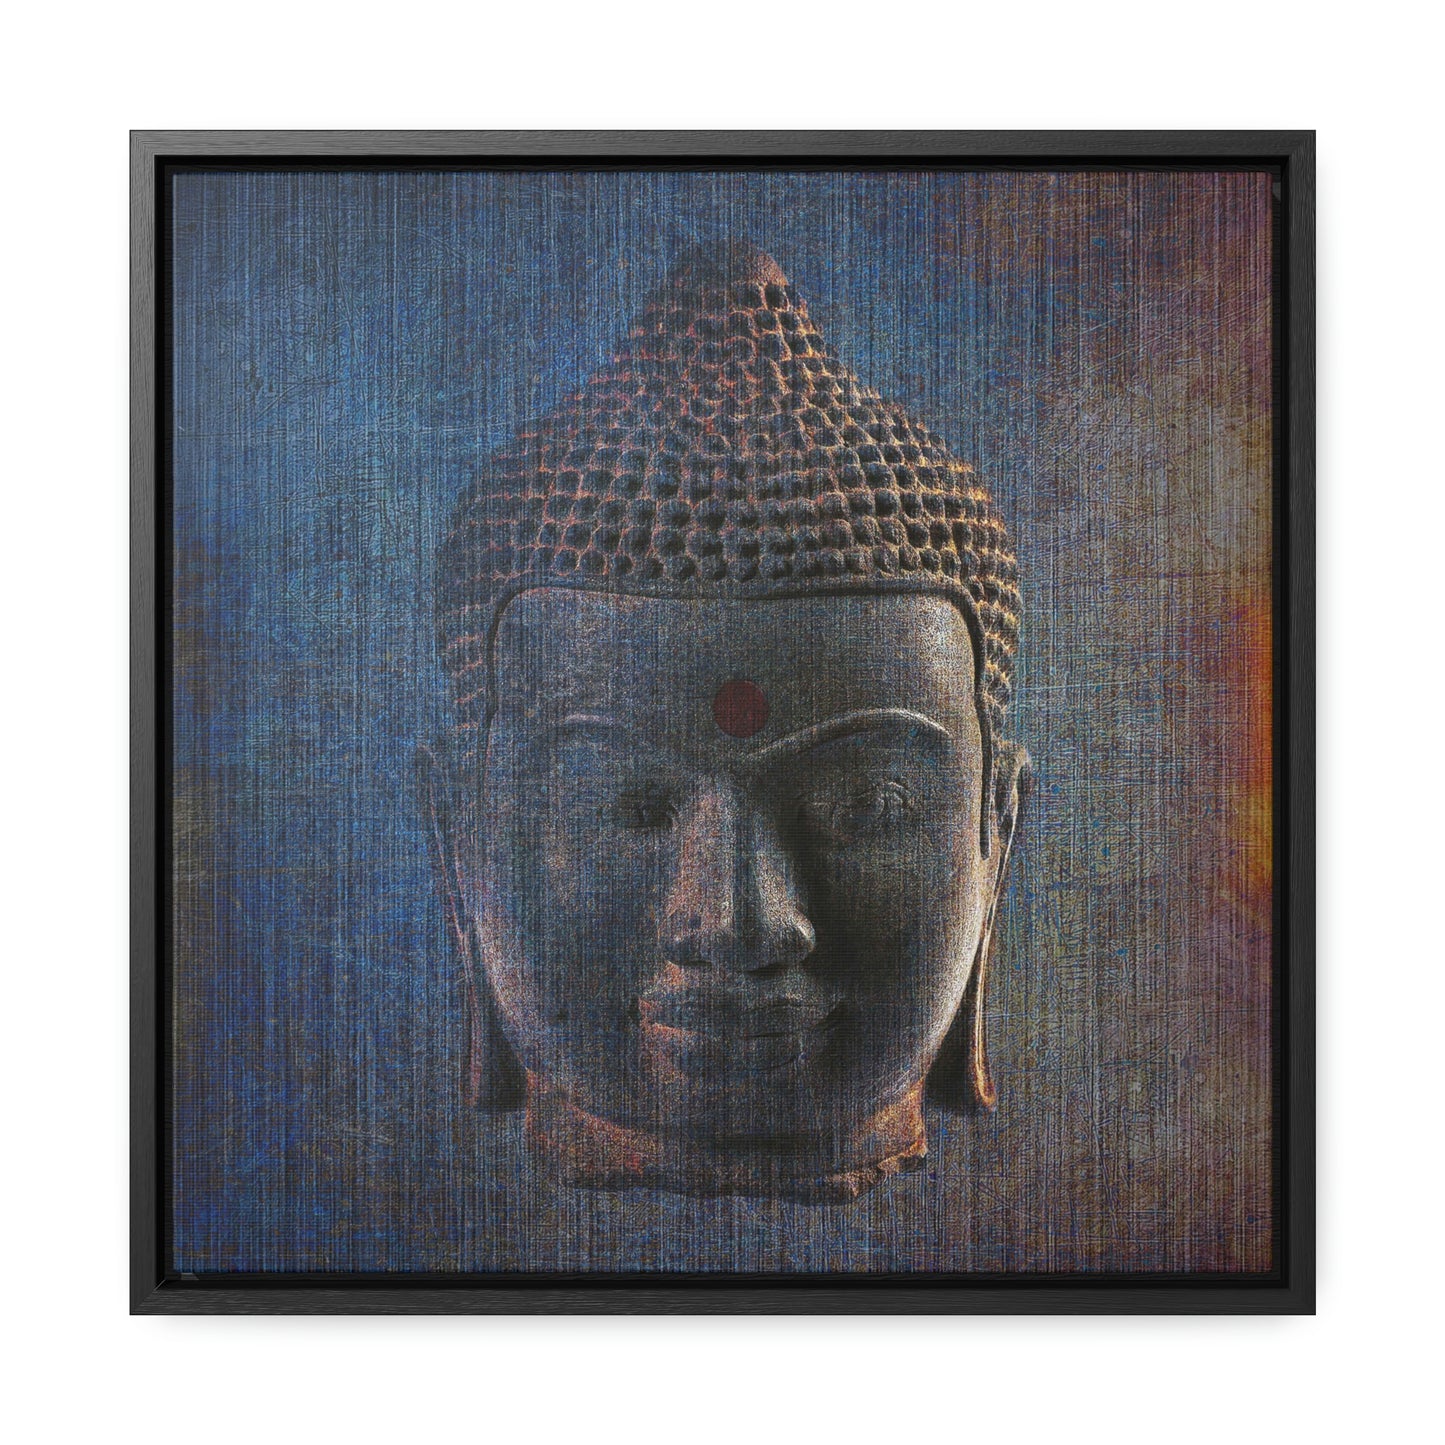 Distressed Blue Buddha Head Print on Square Canvas in a Floating Frame 5 sizes available